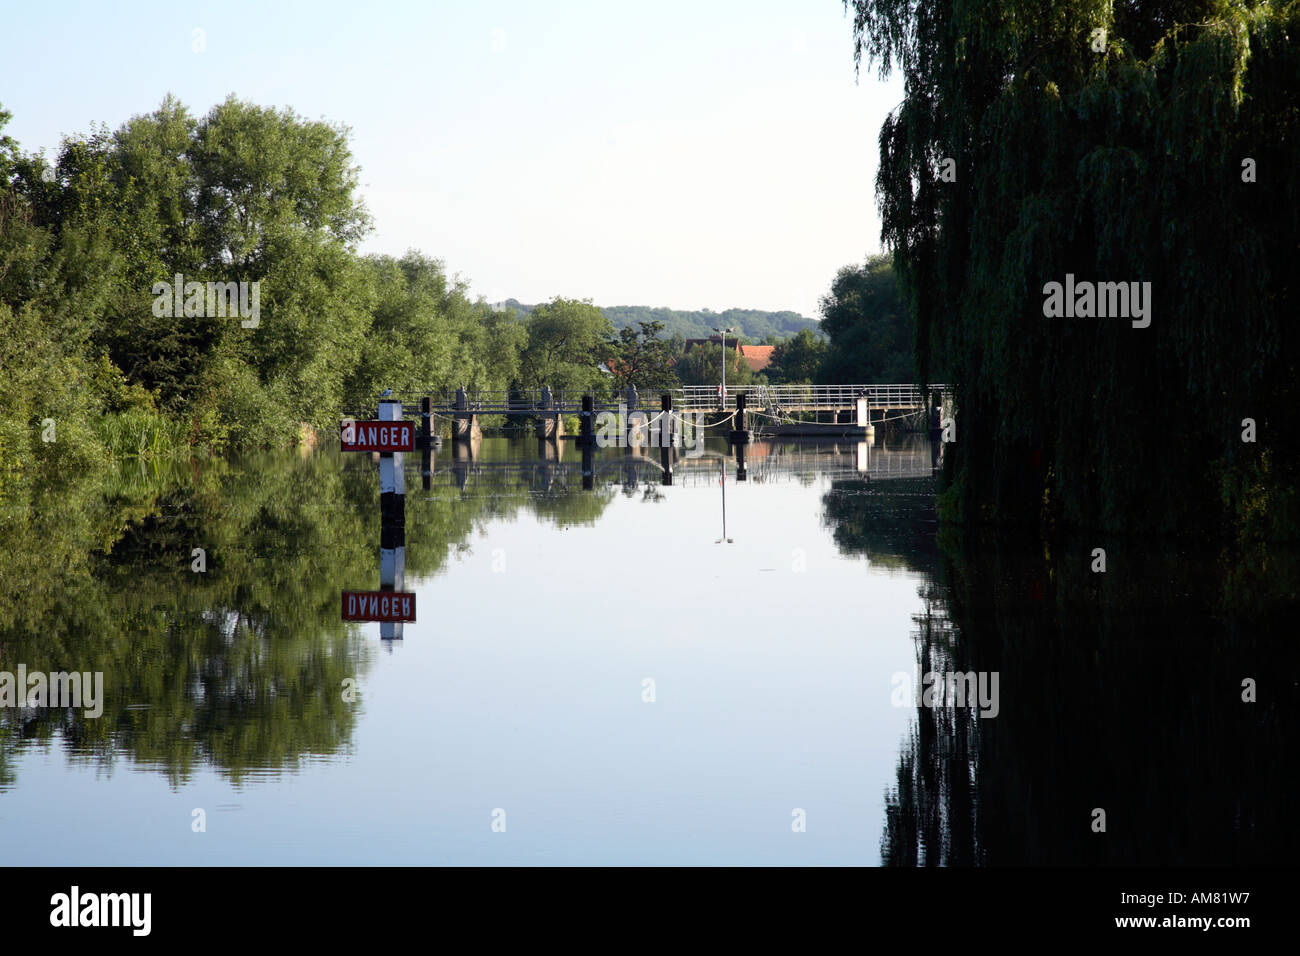 View of Sonning weir on river Thames from Thames path 1 Stock Photo